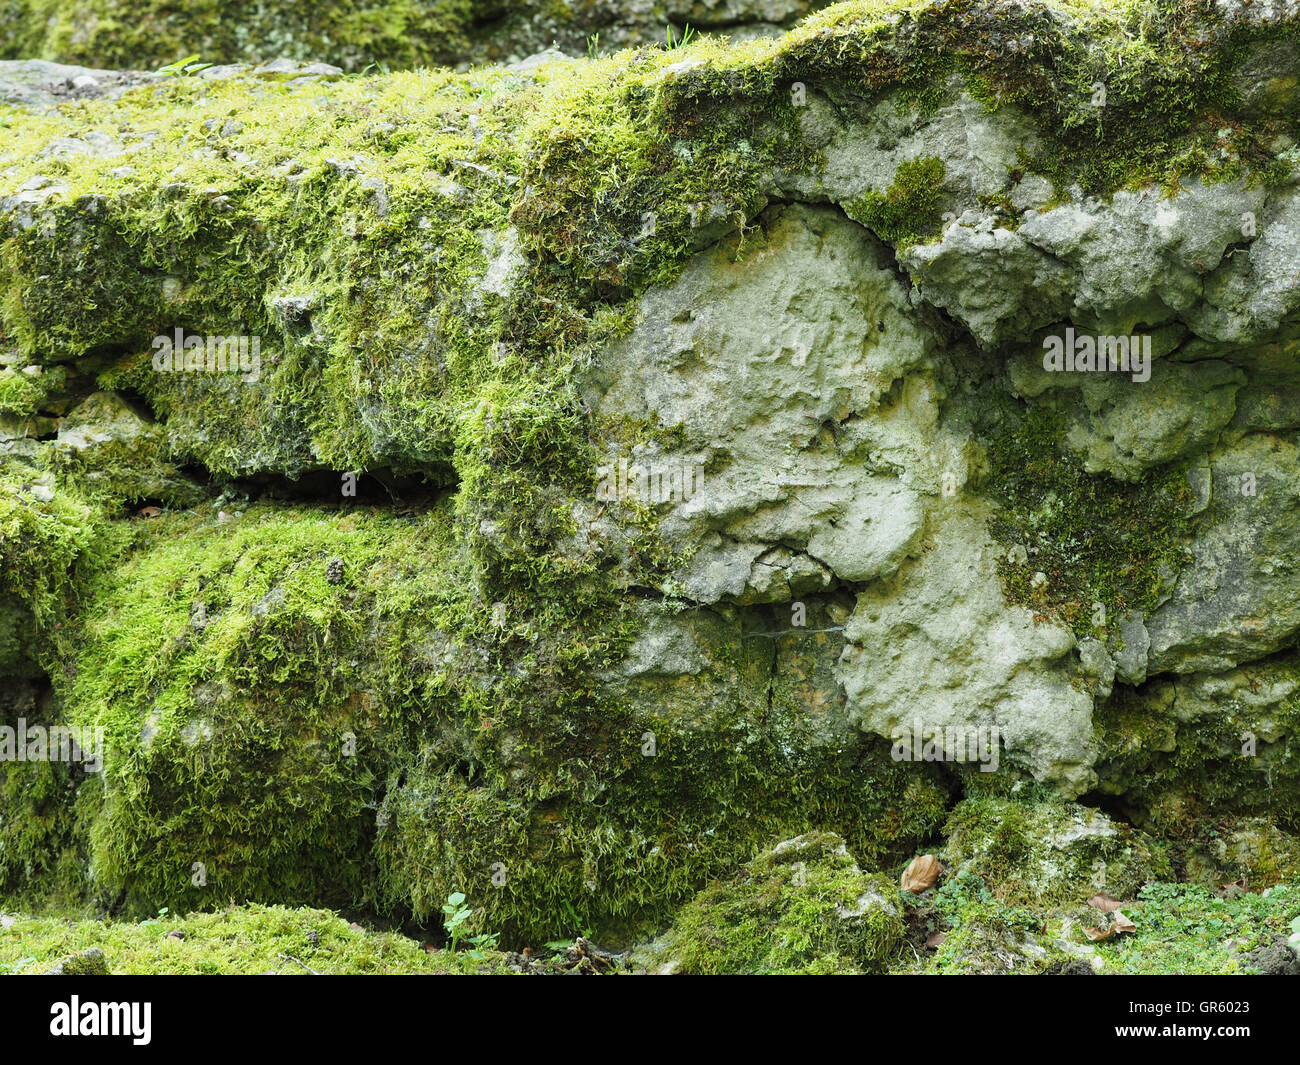 Natural texture of rocks with moss using a background Stock Photo